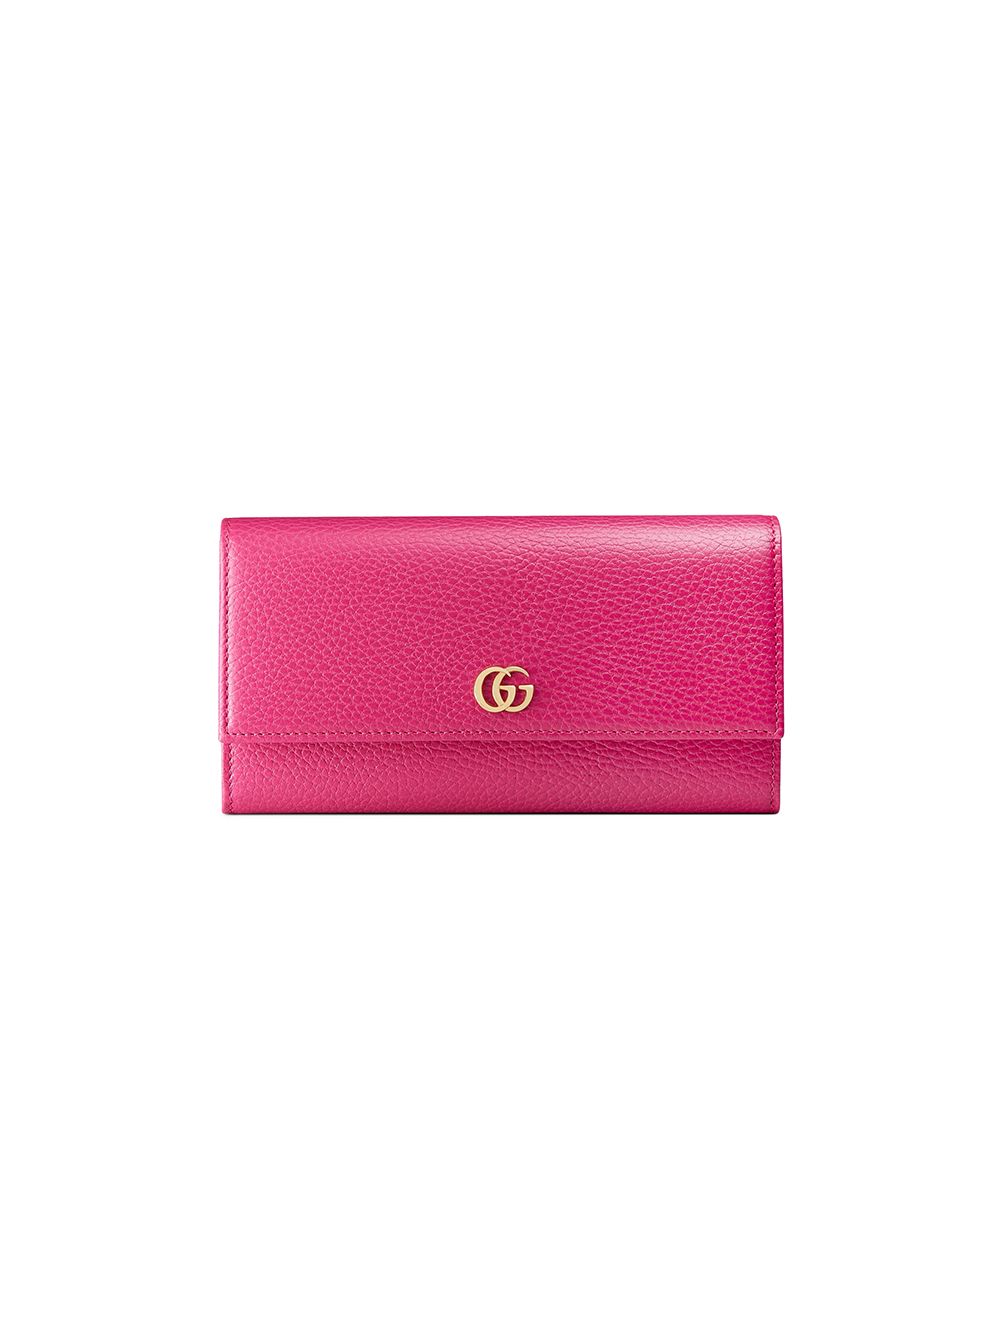 Gucci GG Marmont Leather Continental Wallet - Farfetch